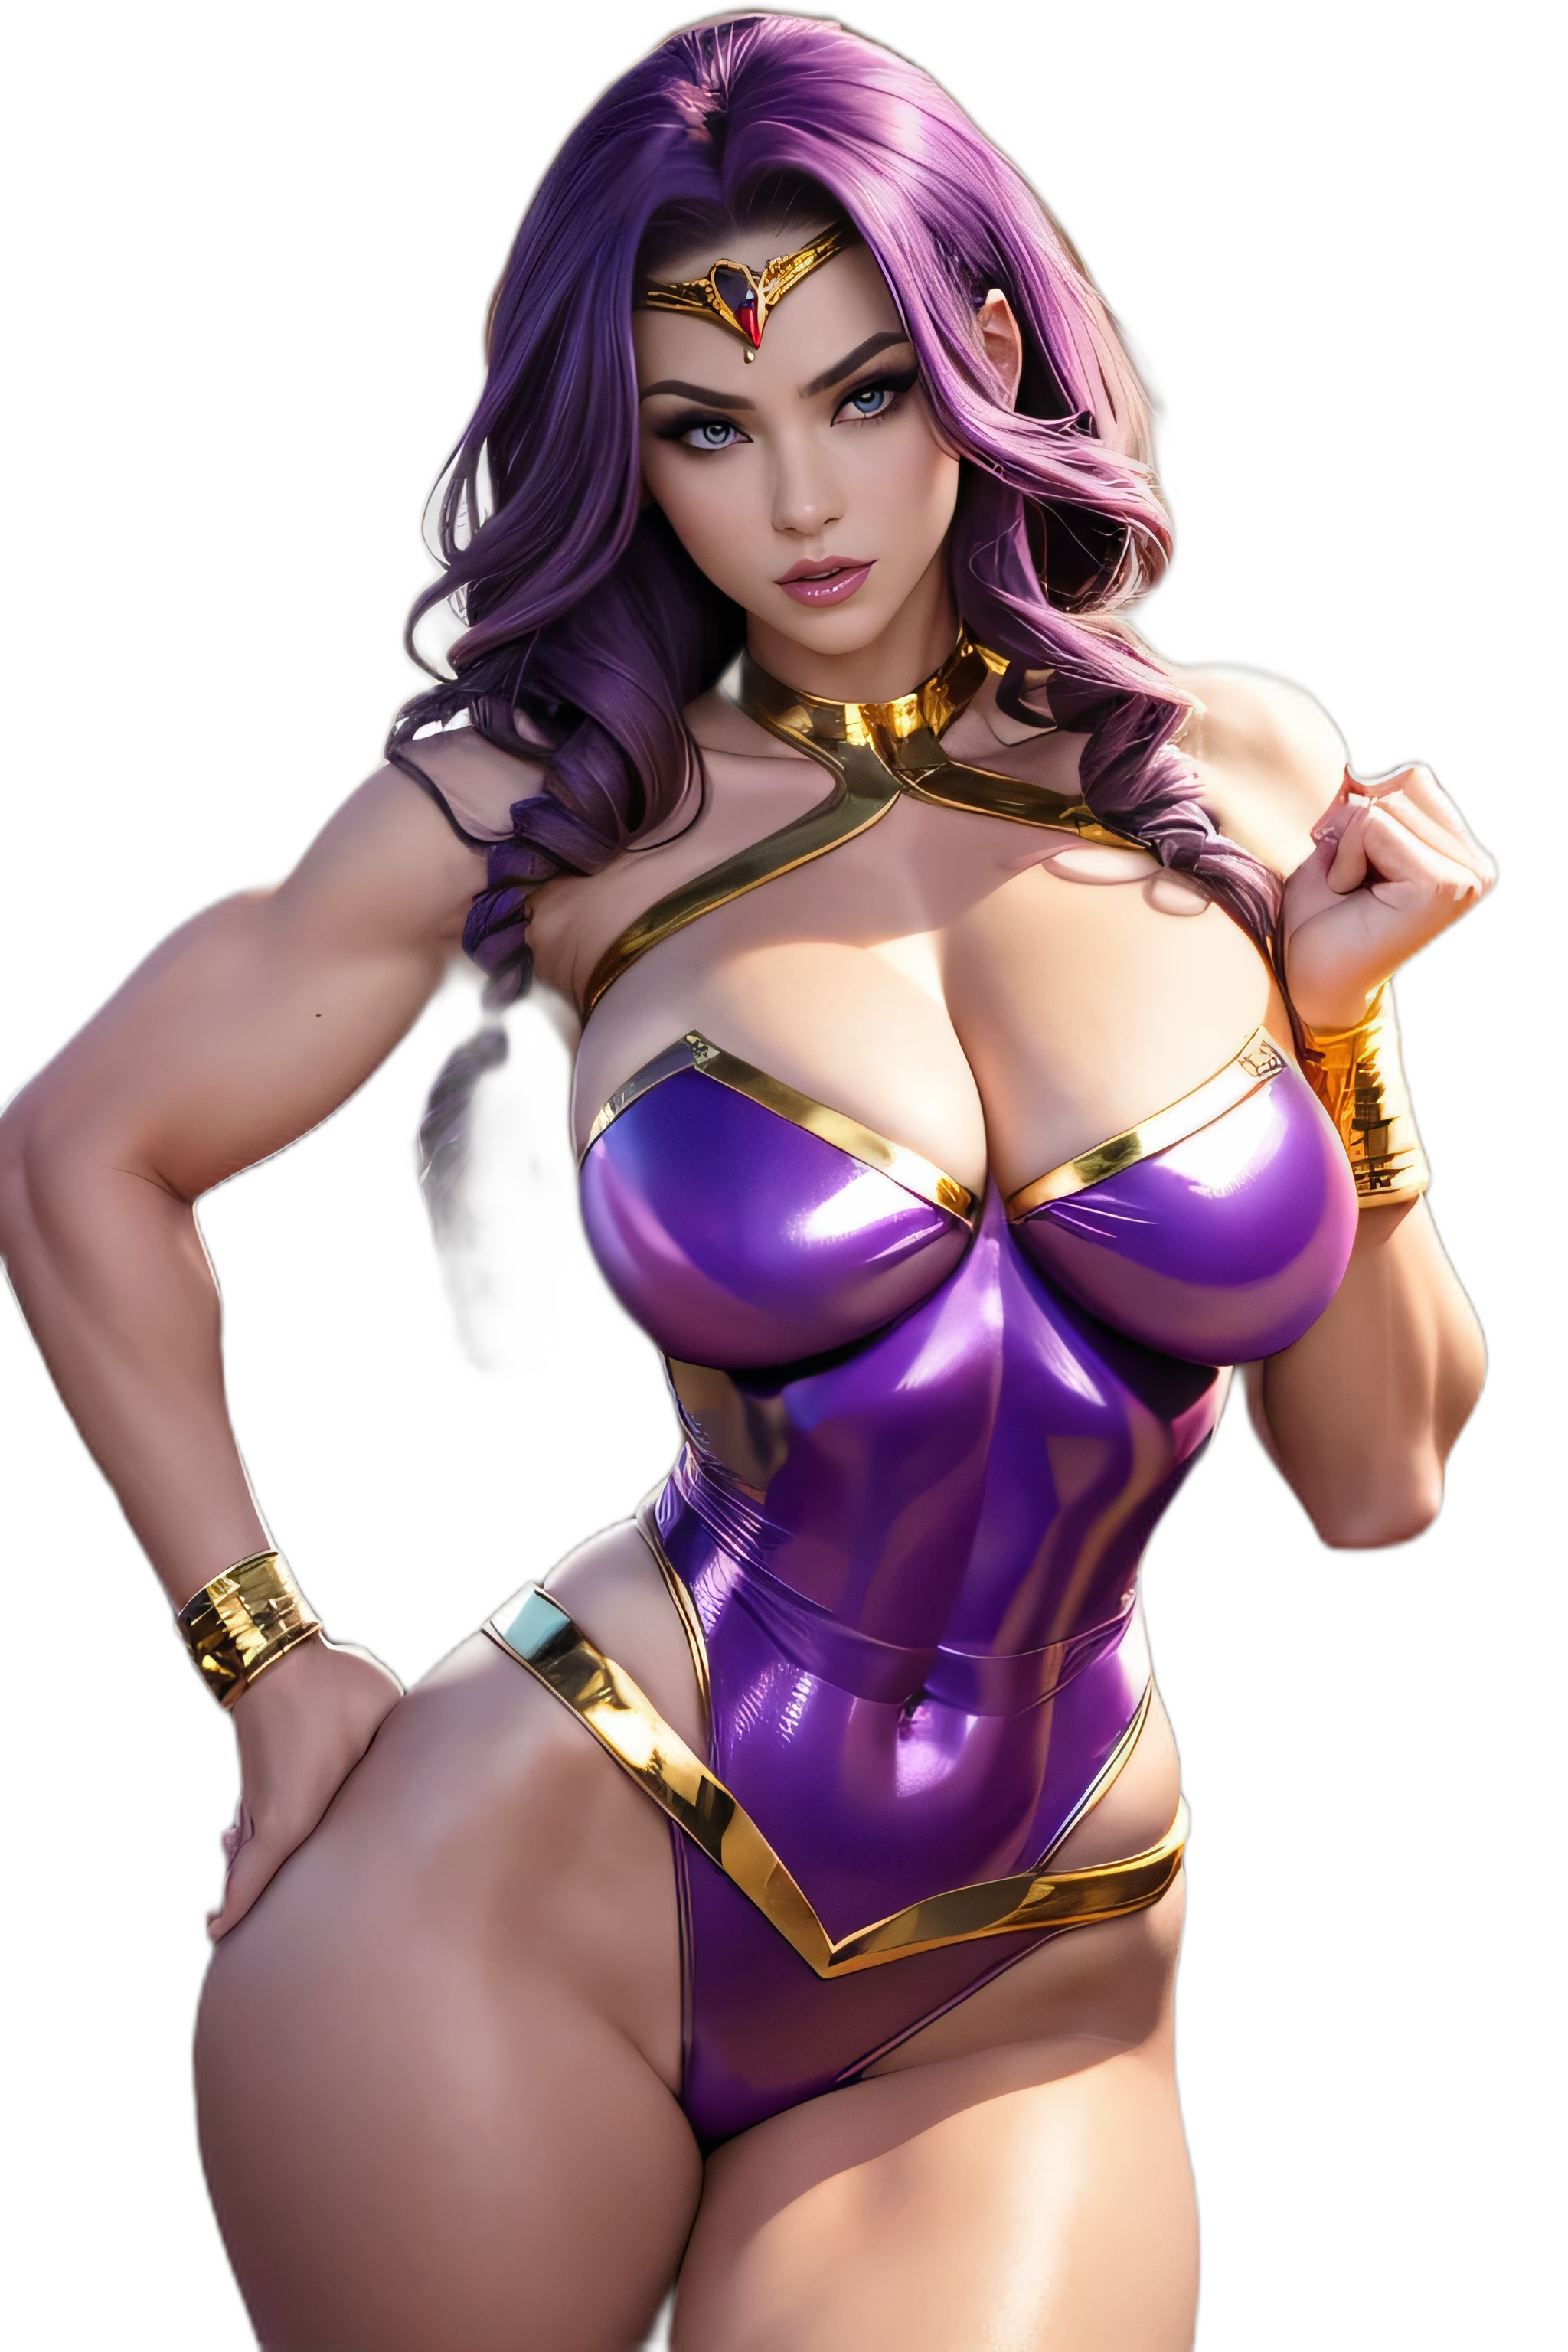 Realistic,Roleplay,Submissive,Fantasy,Female,OC,Love,Seductive super villainess apart of the Cult of Aphrodite her powers are from a cult that is dedicated to Aphrodite, demigod strength, magic seductive magic, illusions  and the power to twist Love for dark purposes.